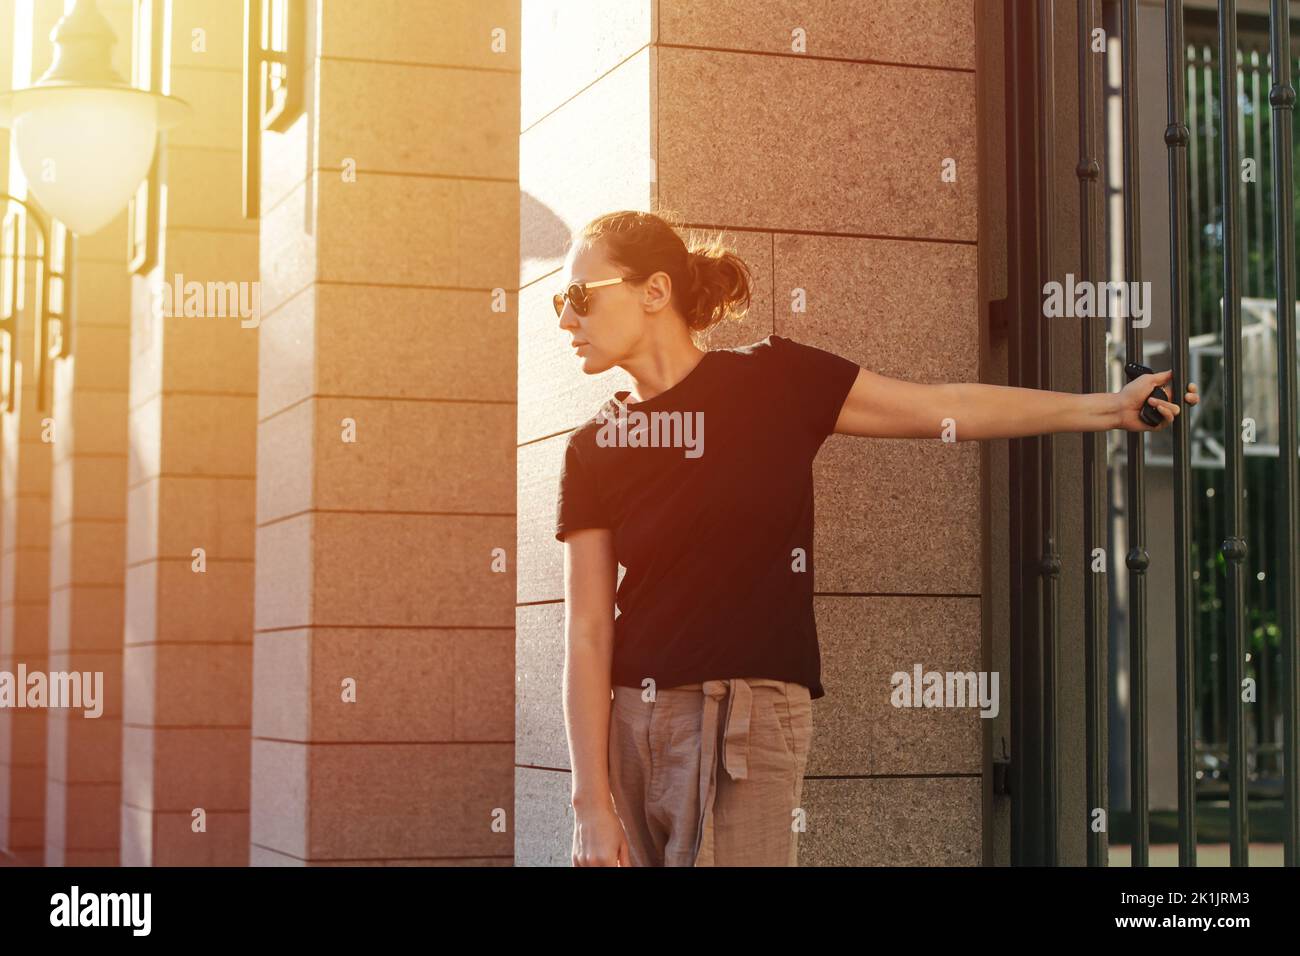 Profile image of a young woman in sunglasses holding on a fence rail behind her back on a sunlit street. Stock Photo